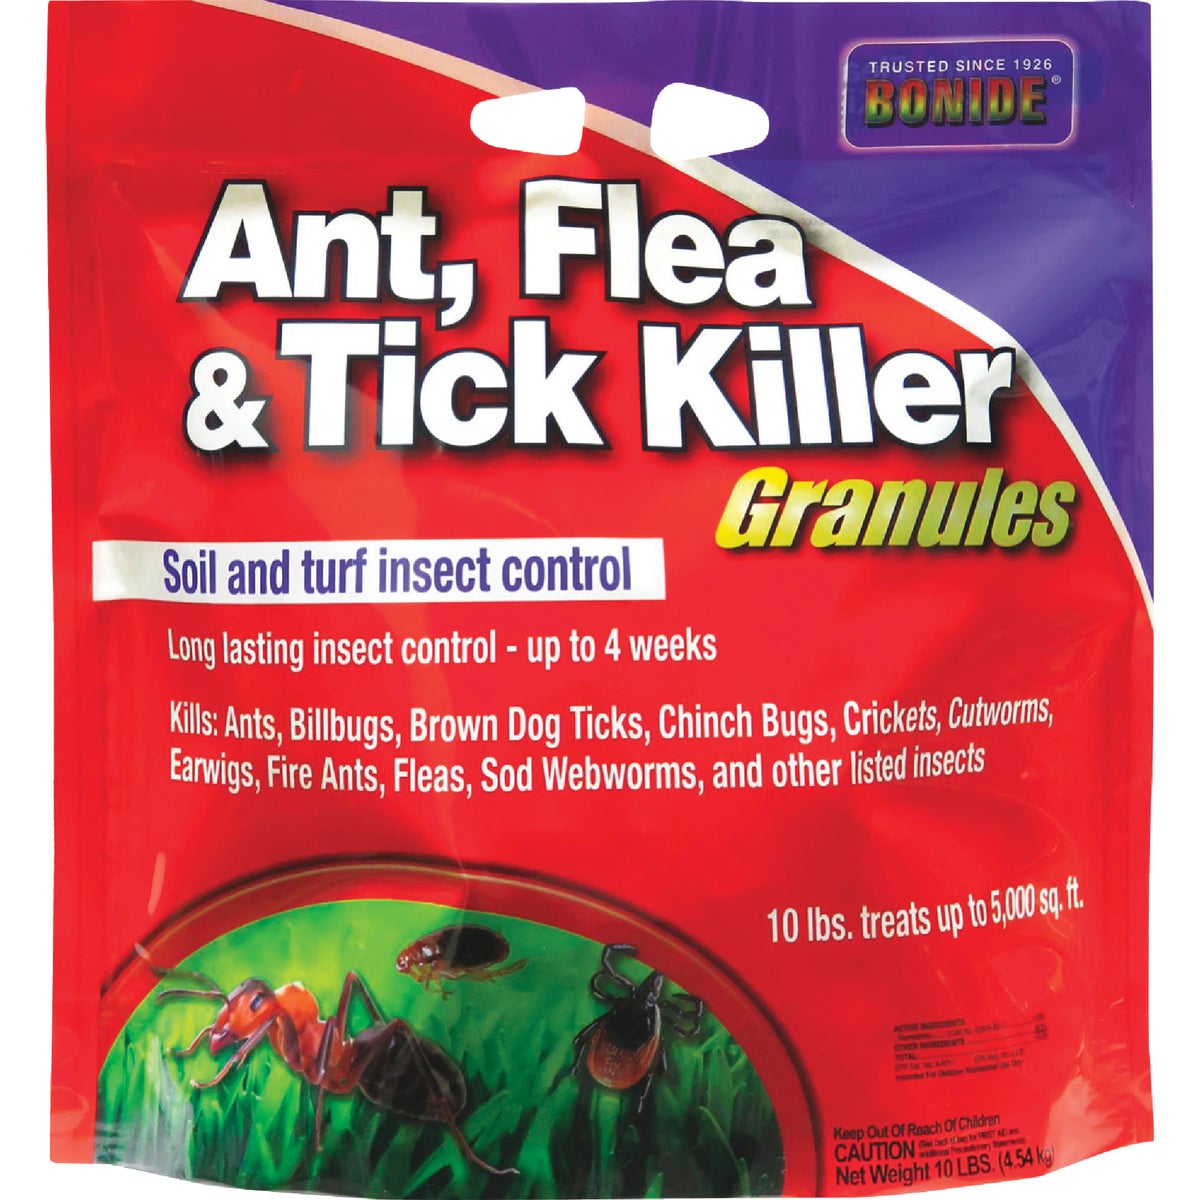 Item 702267, Control and kill insects in soil and turf with Bonide's Ant, Flea &amp; 